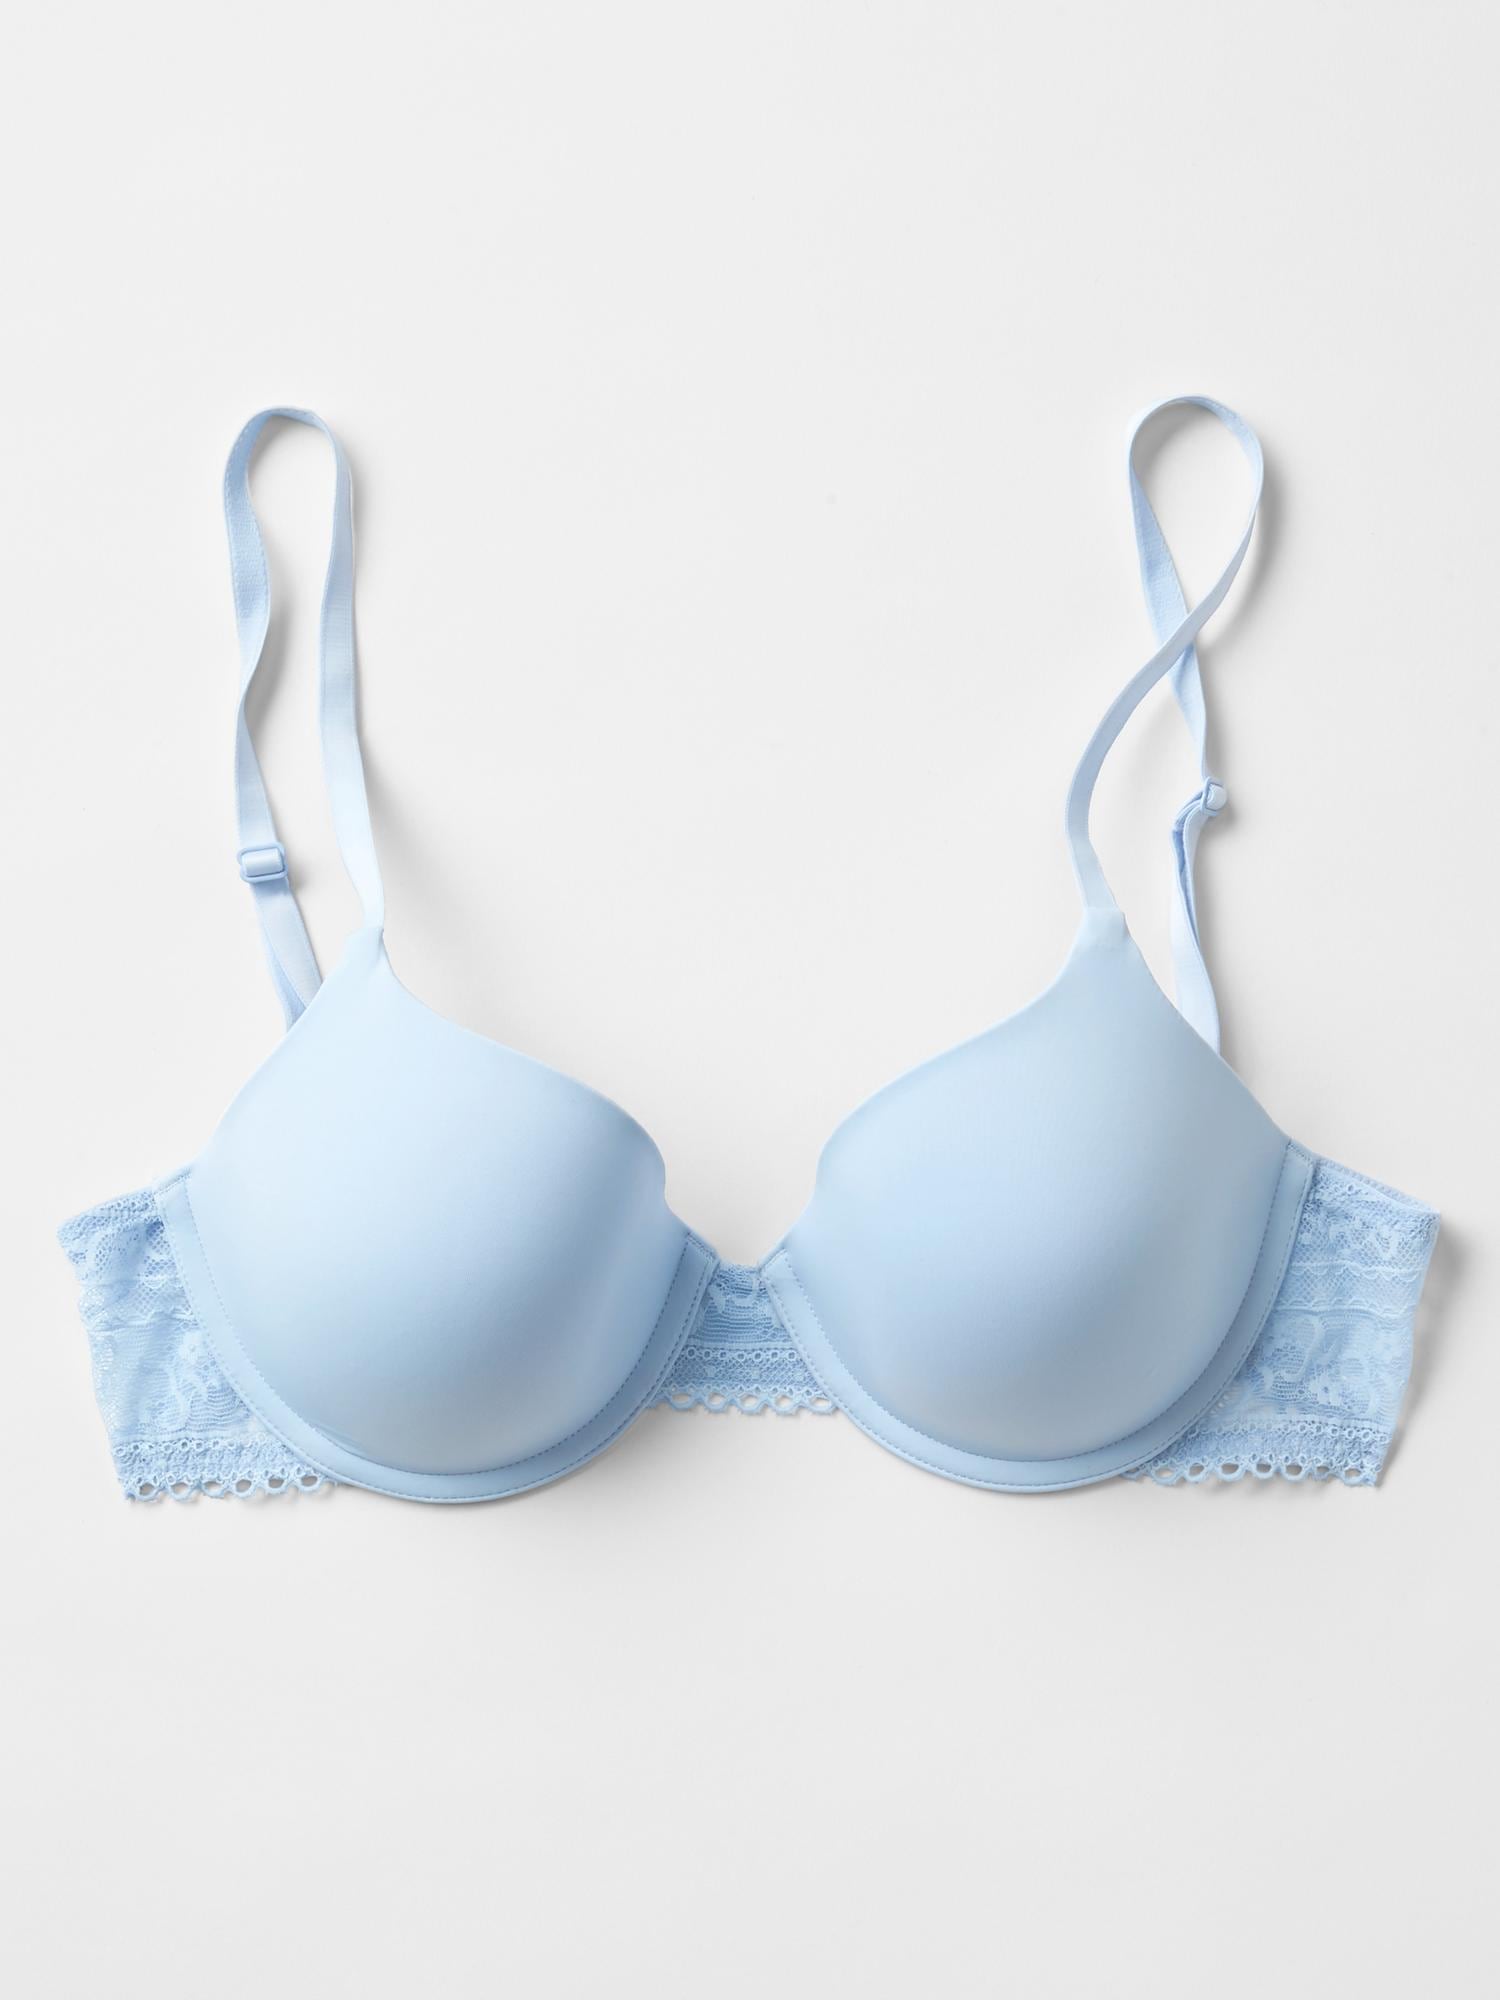 G-Cup has entered the chat 😍 Unlock new confidence with our two best  sellers - Spacer Bra and T-Shirt Bra now in NEW sizes: 34G. 36G